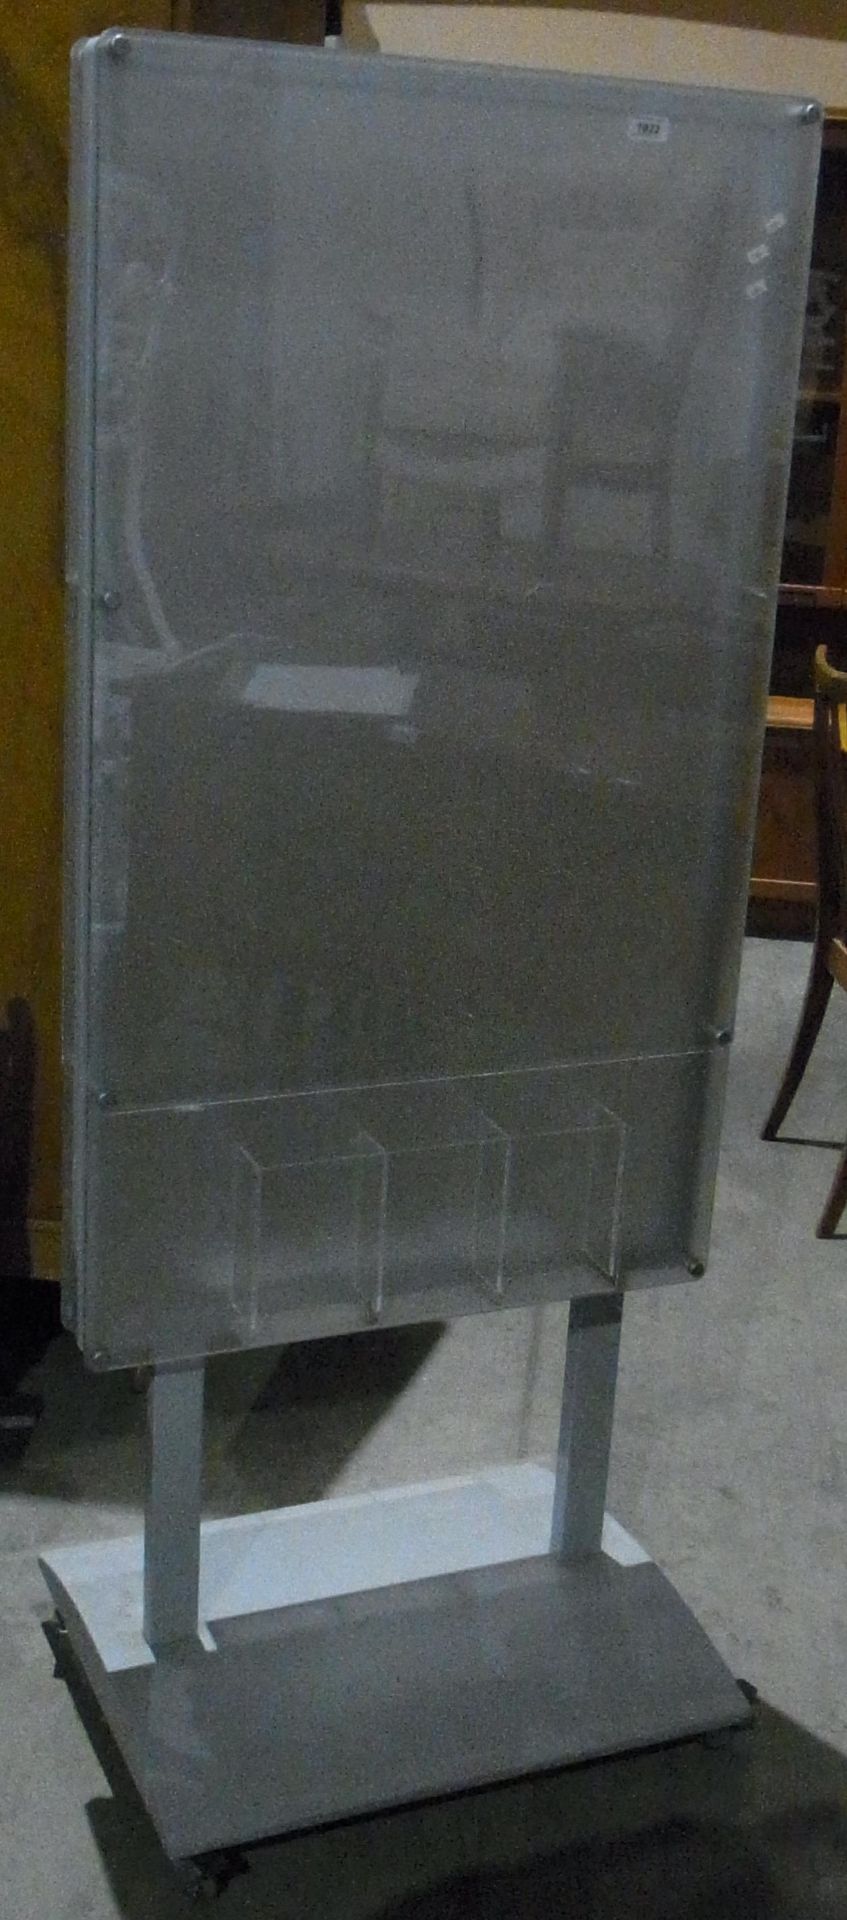 A clear plastic freestanding notice board on grey metal base